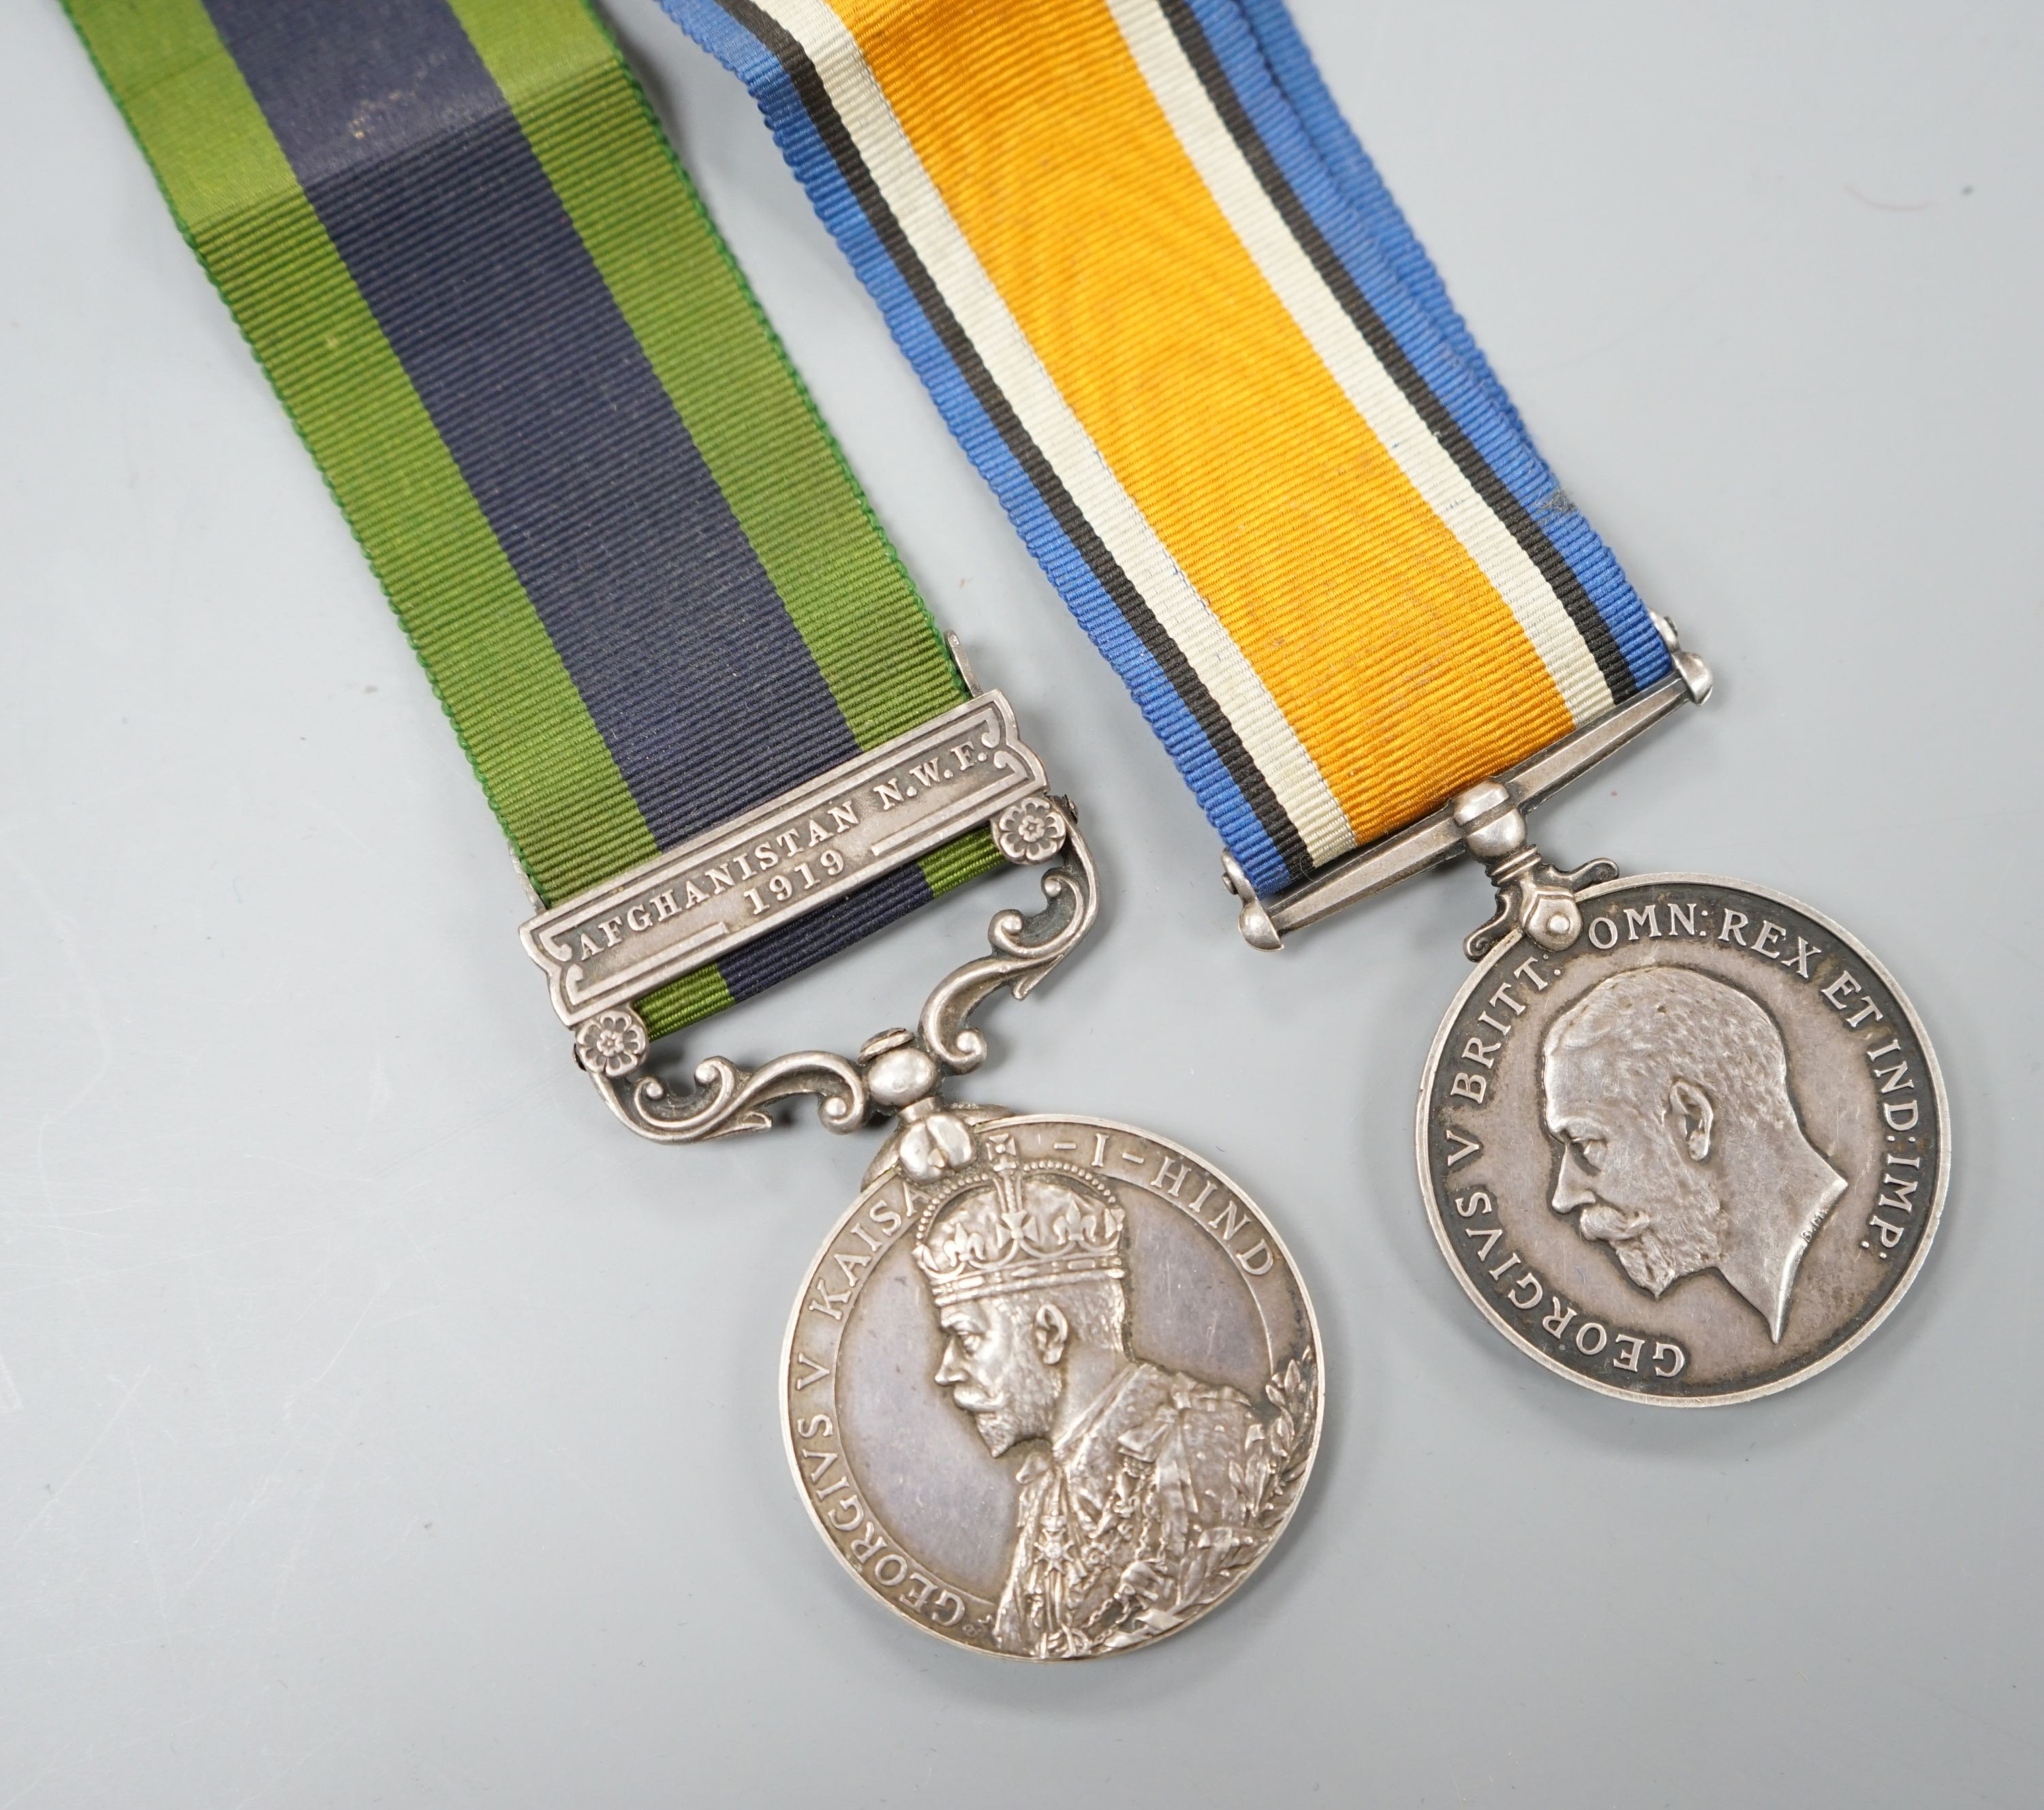 A George V IGSM with Afghanistan N.W.F. 1919 clasp and WW1 war medal to 1914 PTE. J. G. GIBBS HAMPS. R.